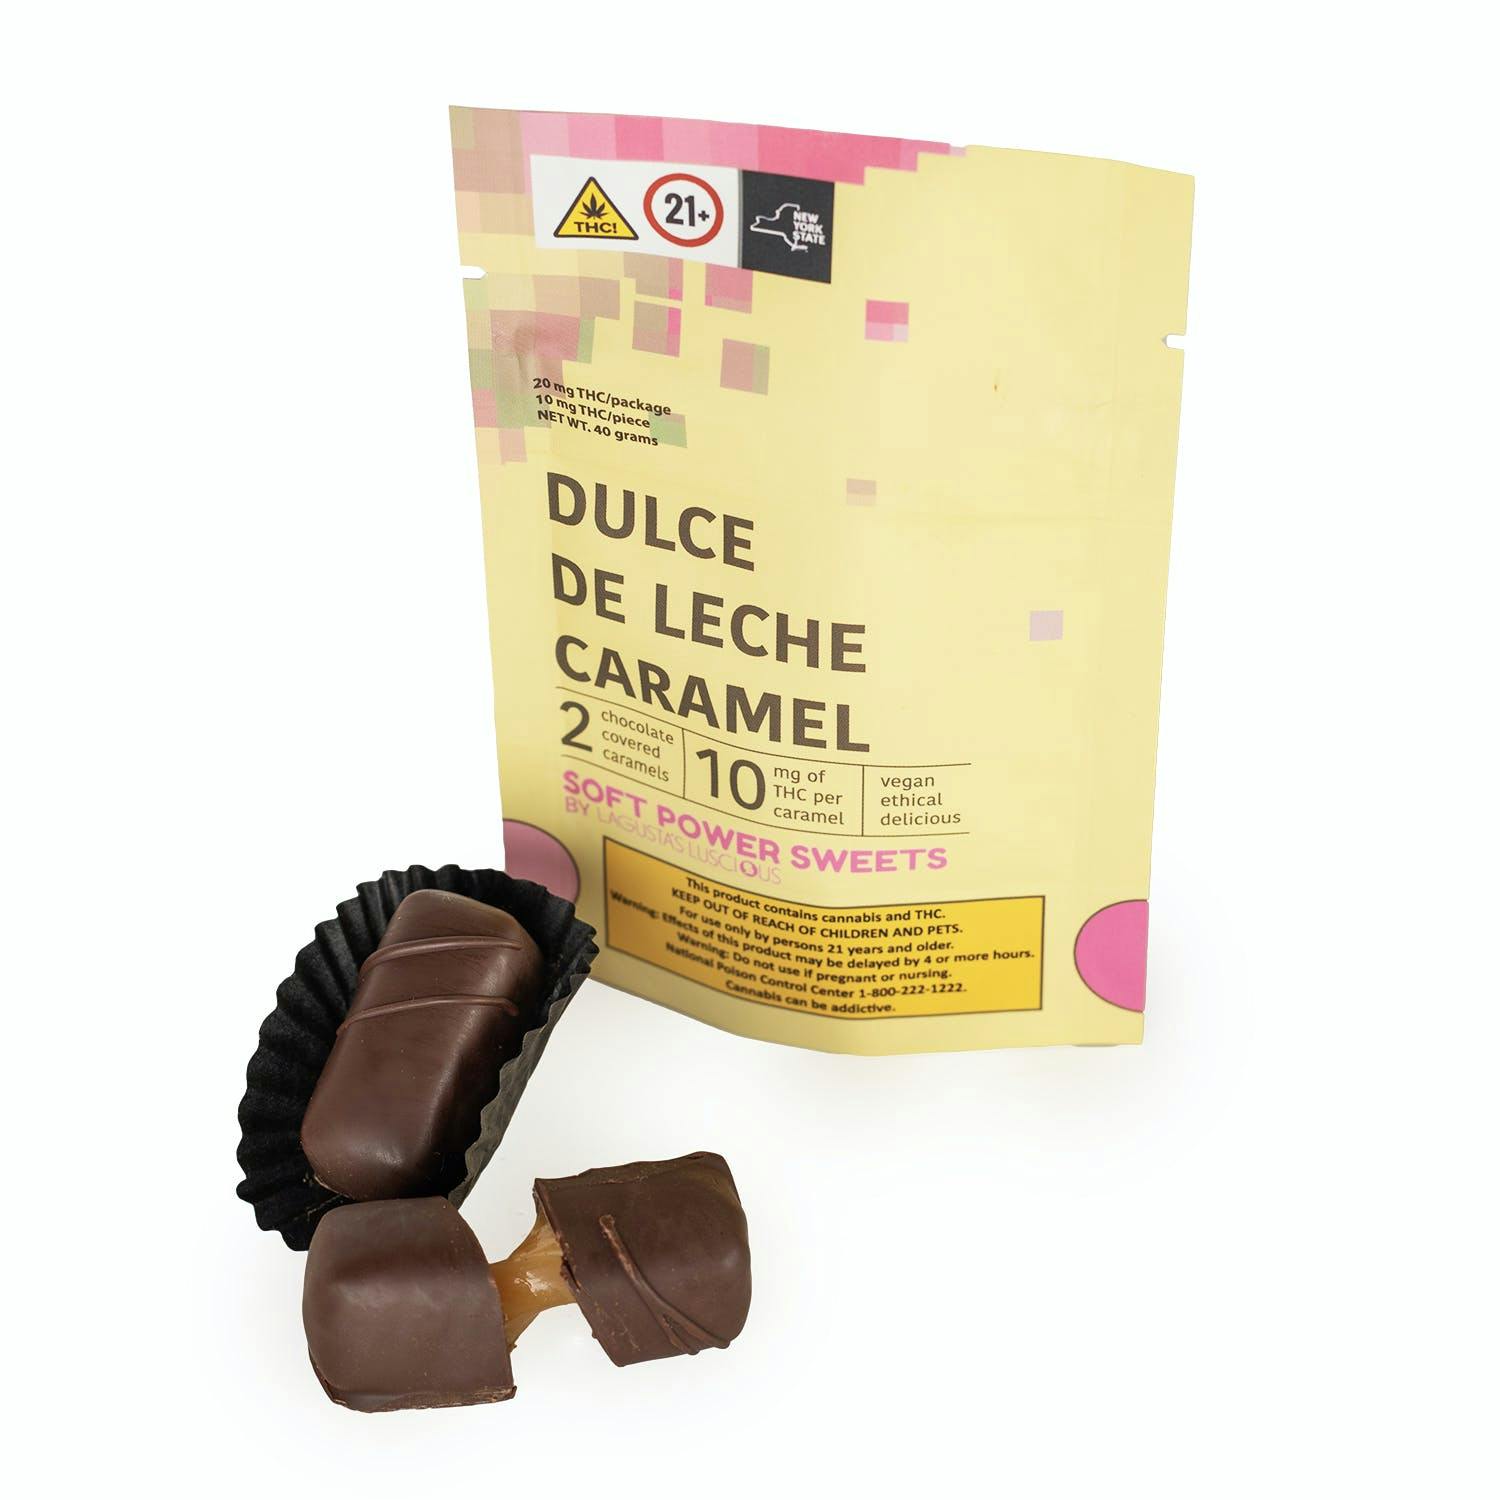 Dulce De Leche Caramel Chocolates • 2 Pack - Soft Power Sweets - EDIBLES - Rockland County Weed Delivery | Treehouse Cannabis